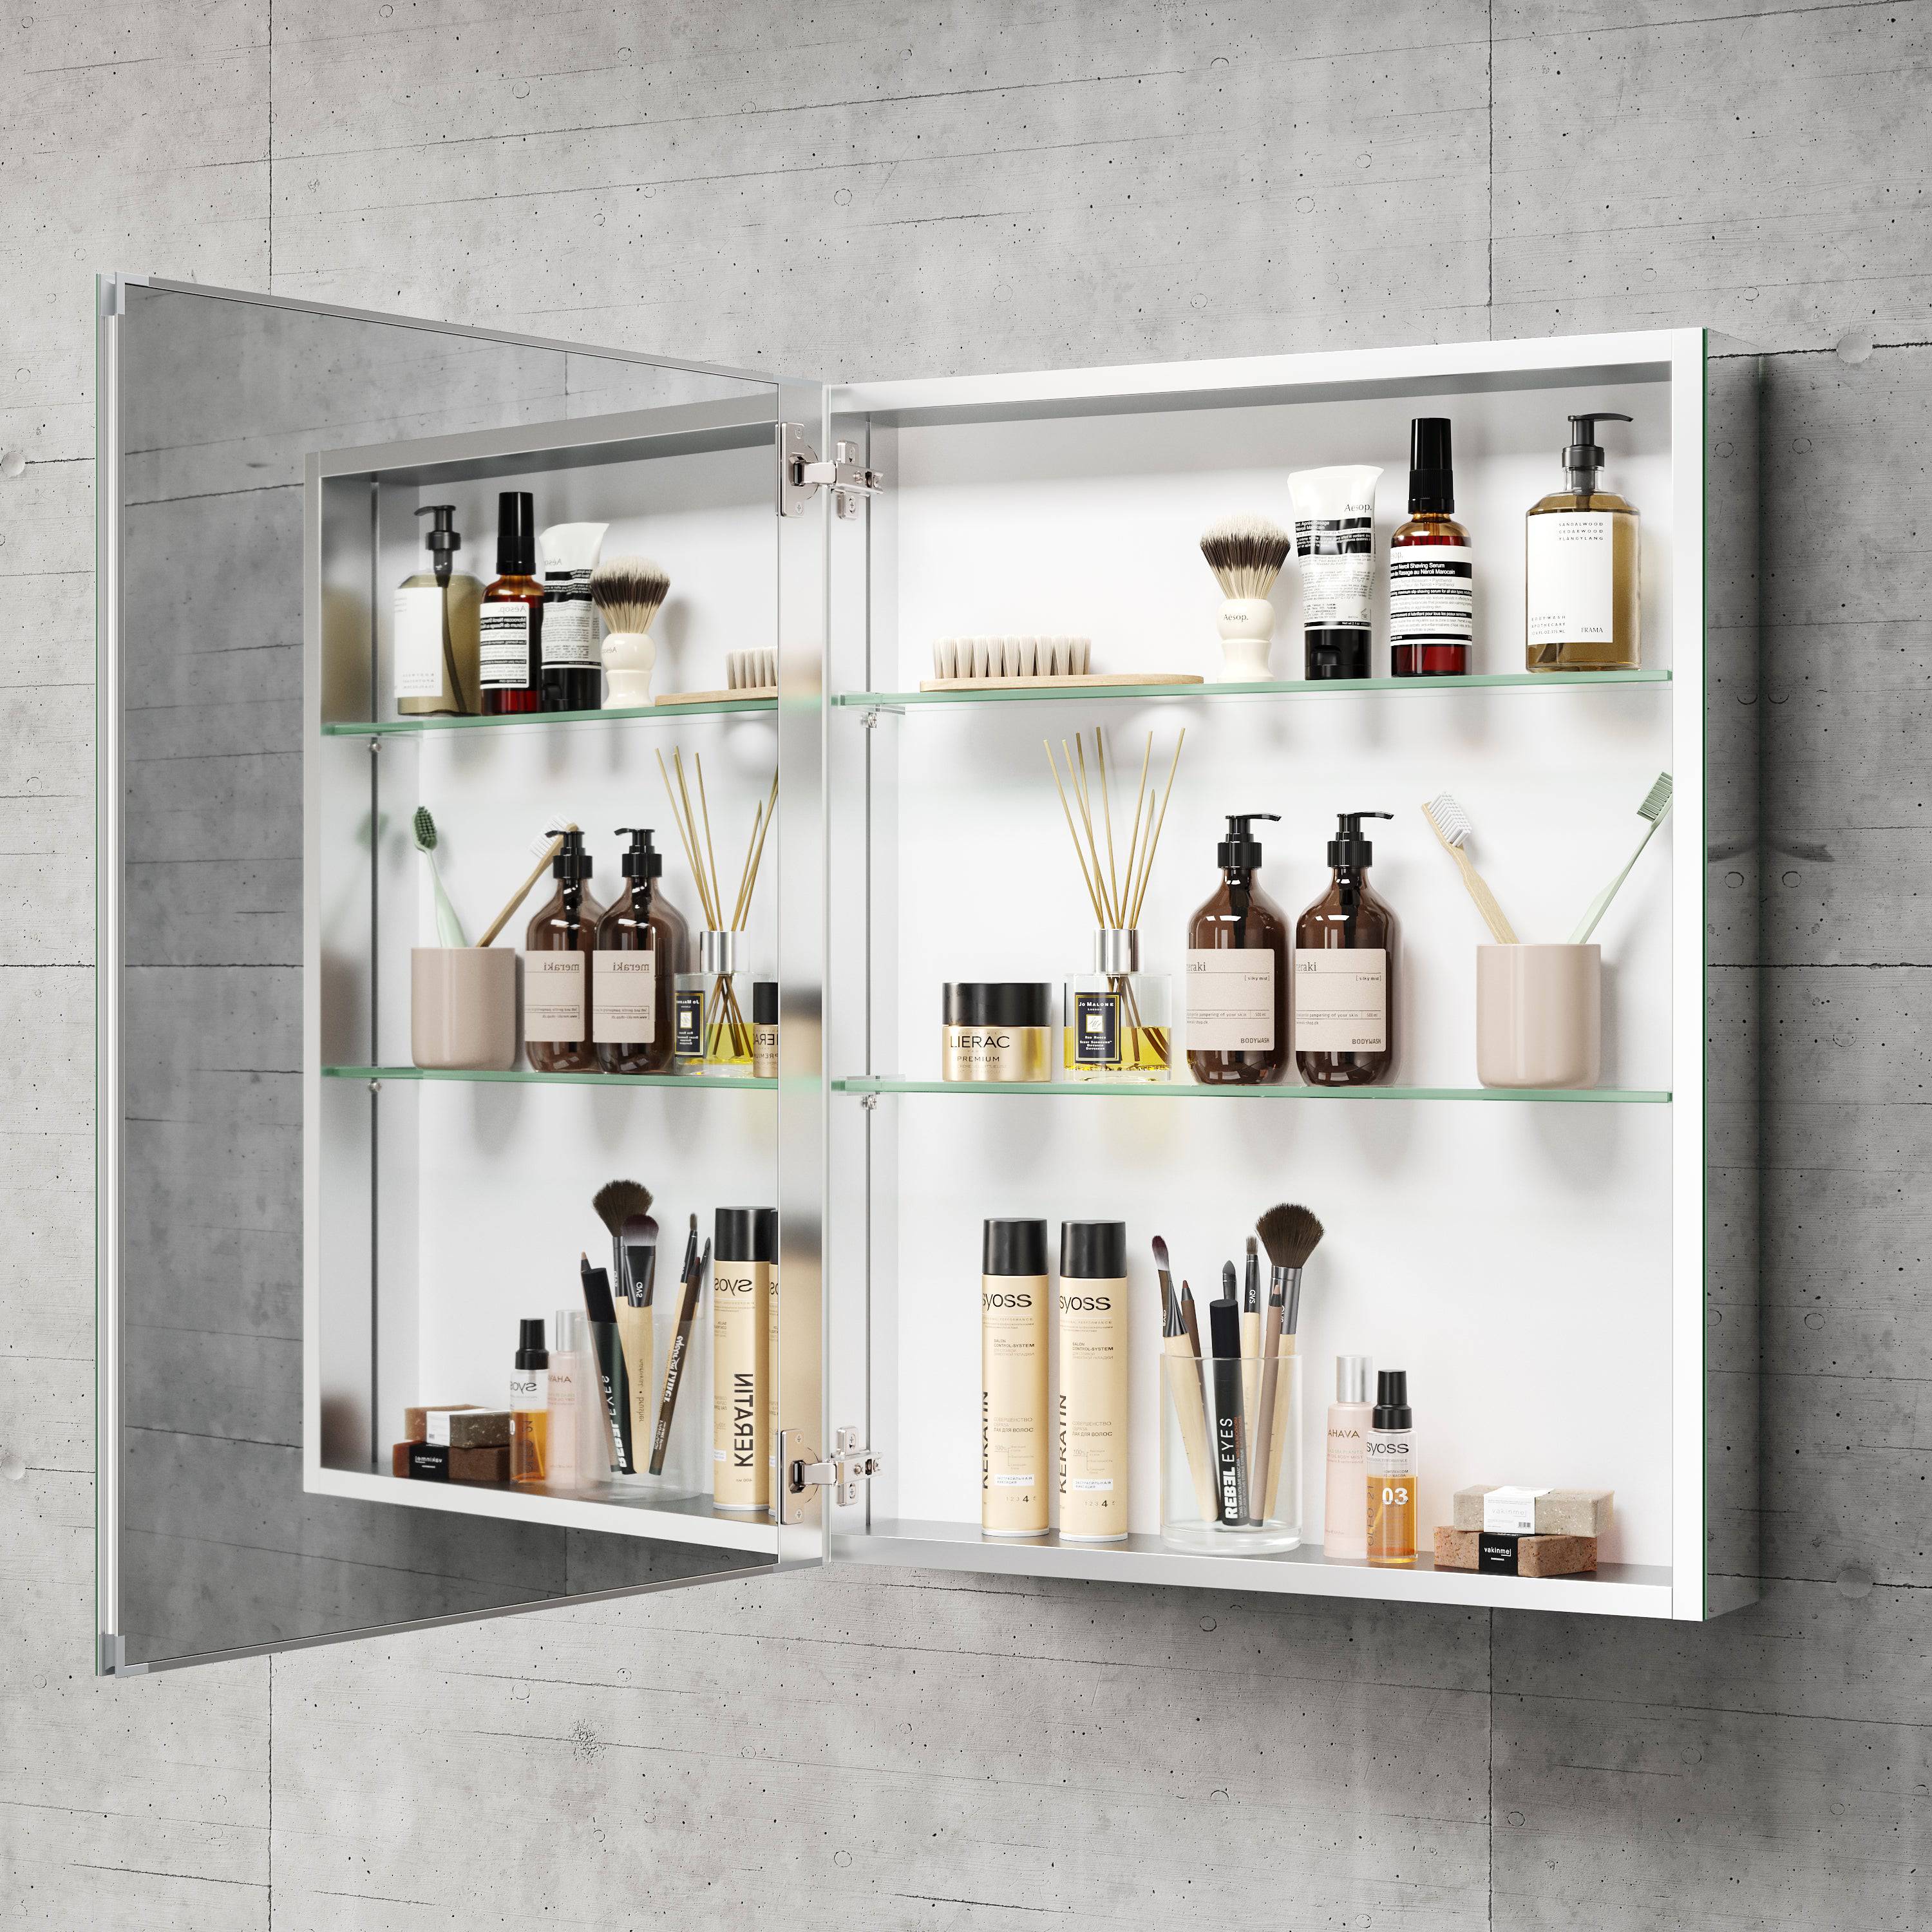 Stylish and Practical 24x30 Inch Medicine Cabinet - Soft-Closing Hinges and Adjustable Shelves for Optimal Storage and Convenience - Eco LED Lightings 